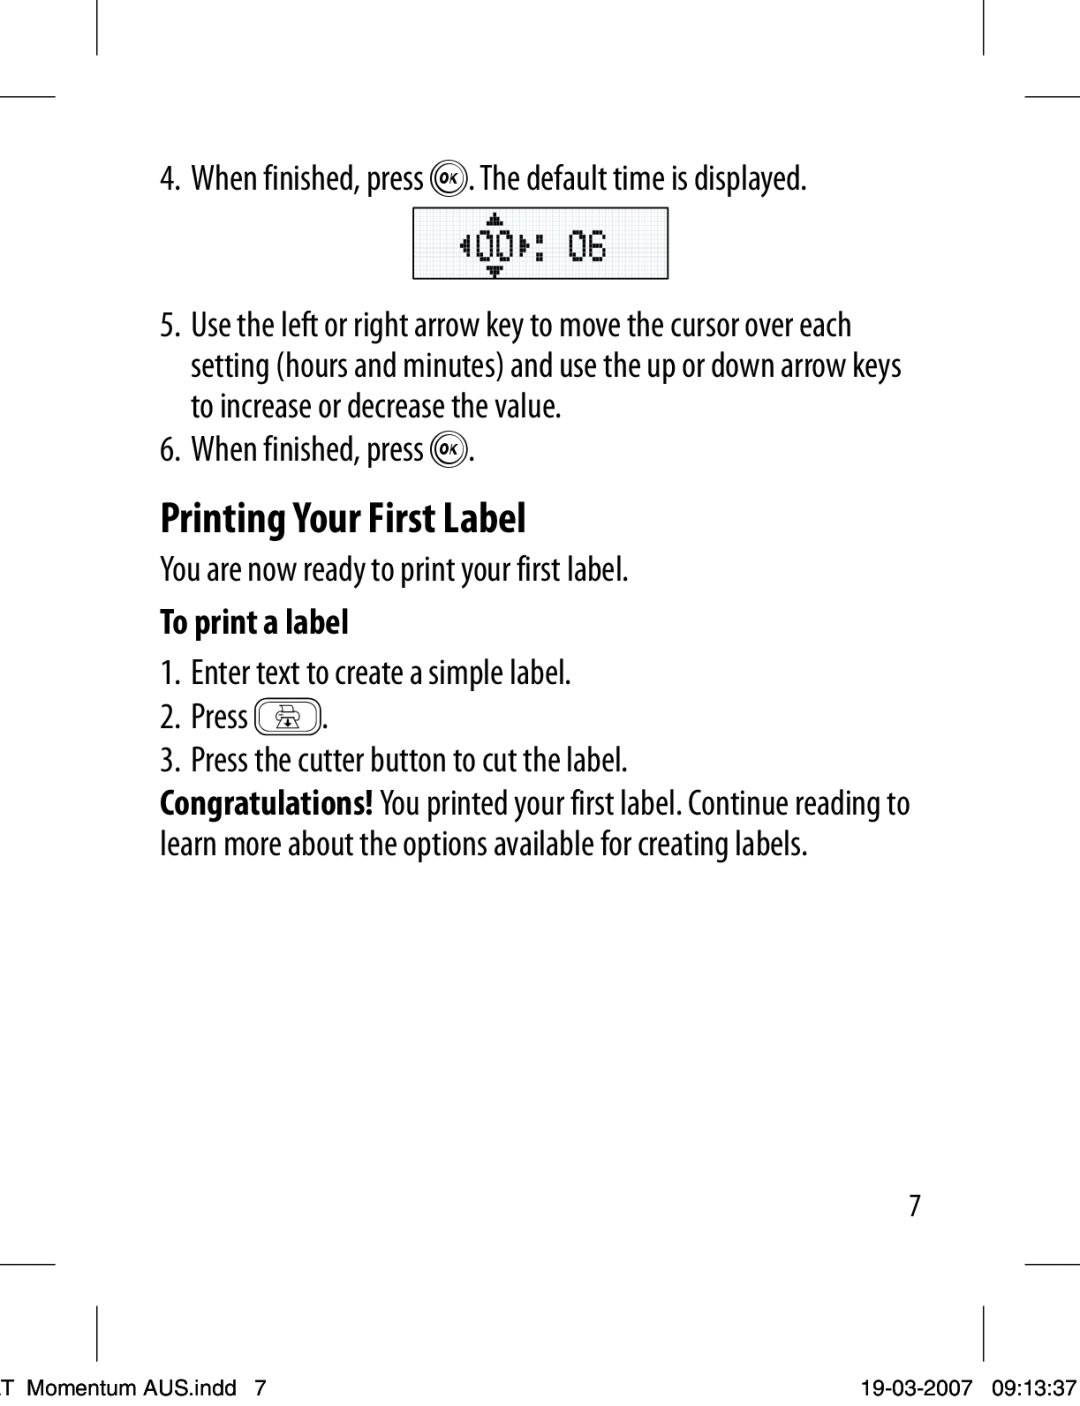 Dymo LT-100T manual Printing Your First Label, To print a label 